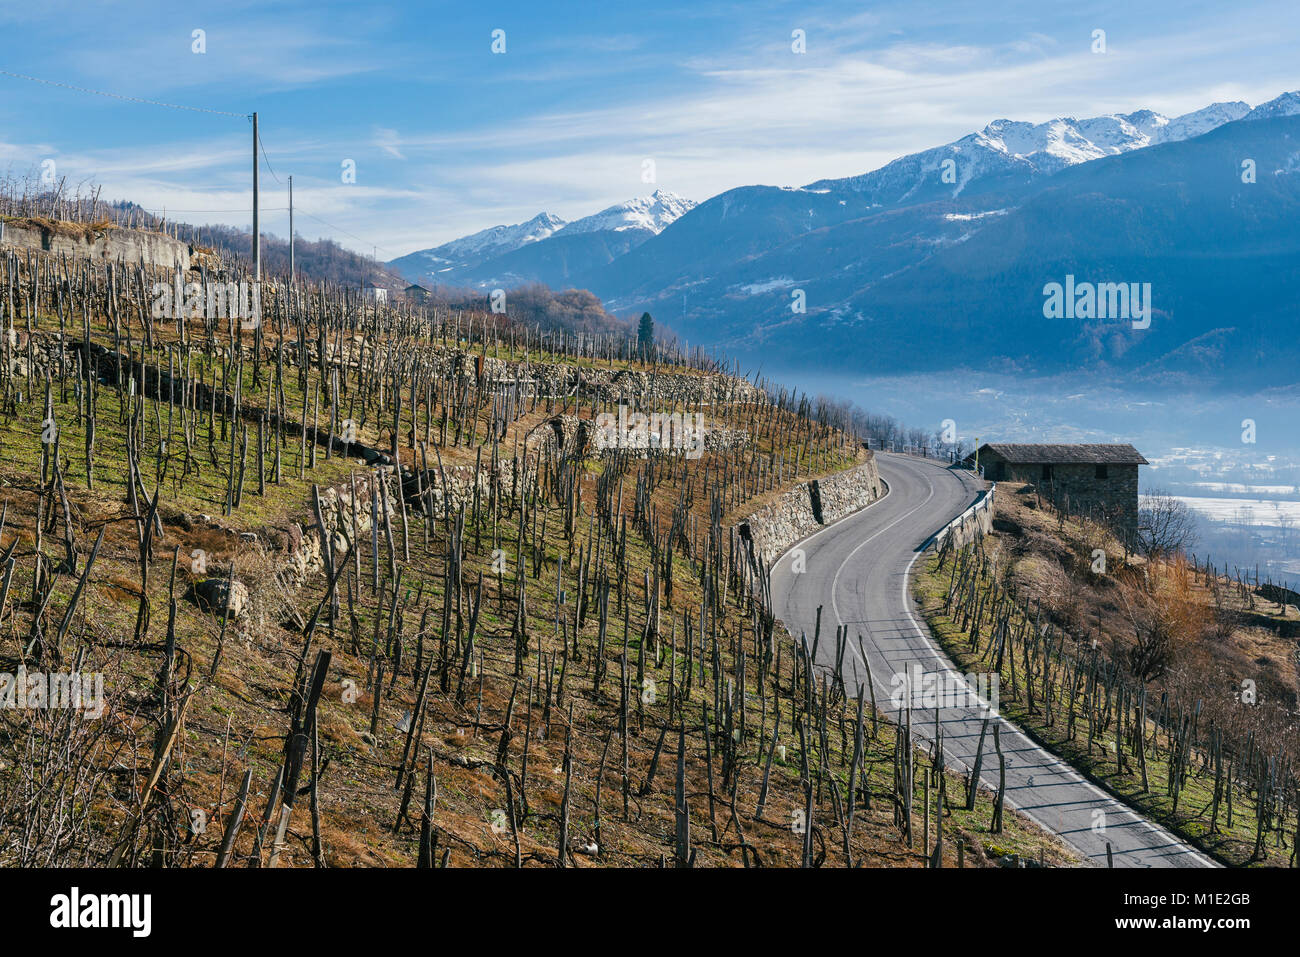 Swerving roads in Valtellina, a valley near Sondrio in the Lombardy region of northern Italy, bordering Switzerland Stock Photo